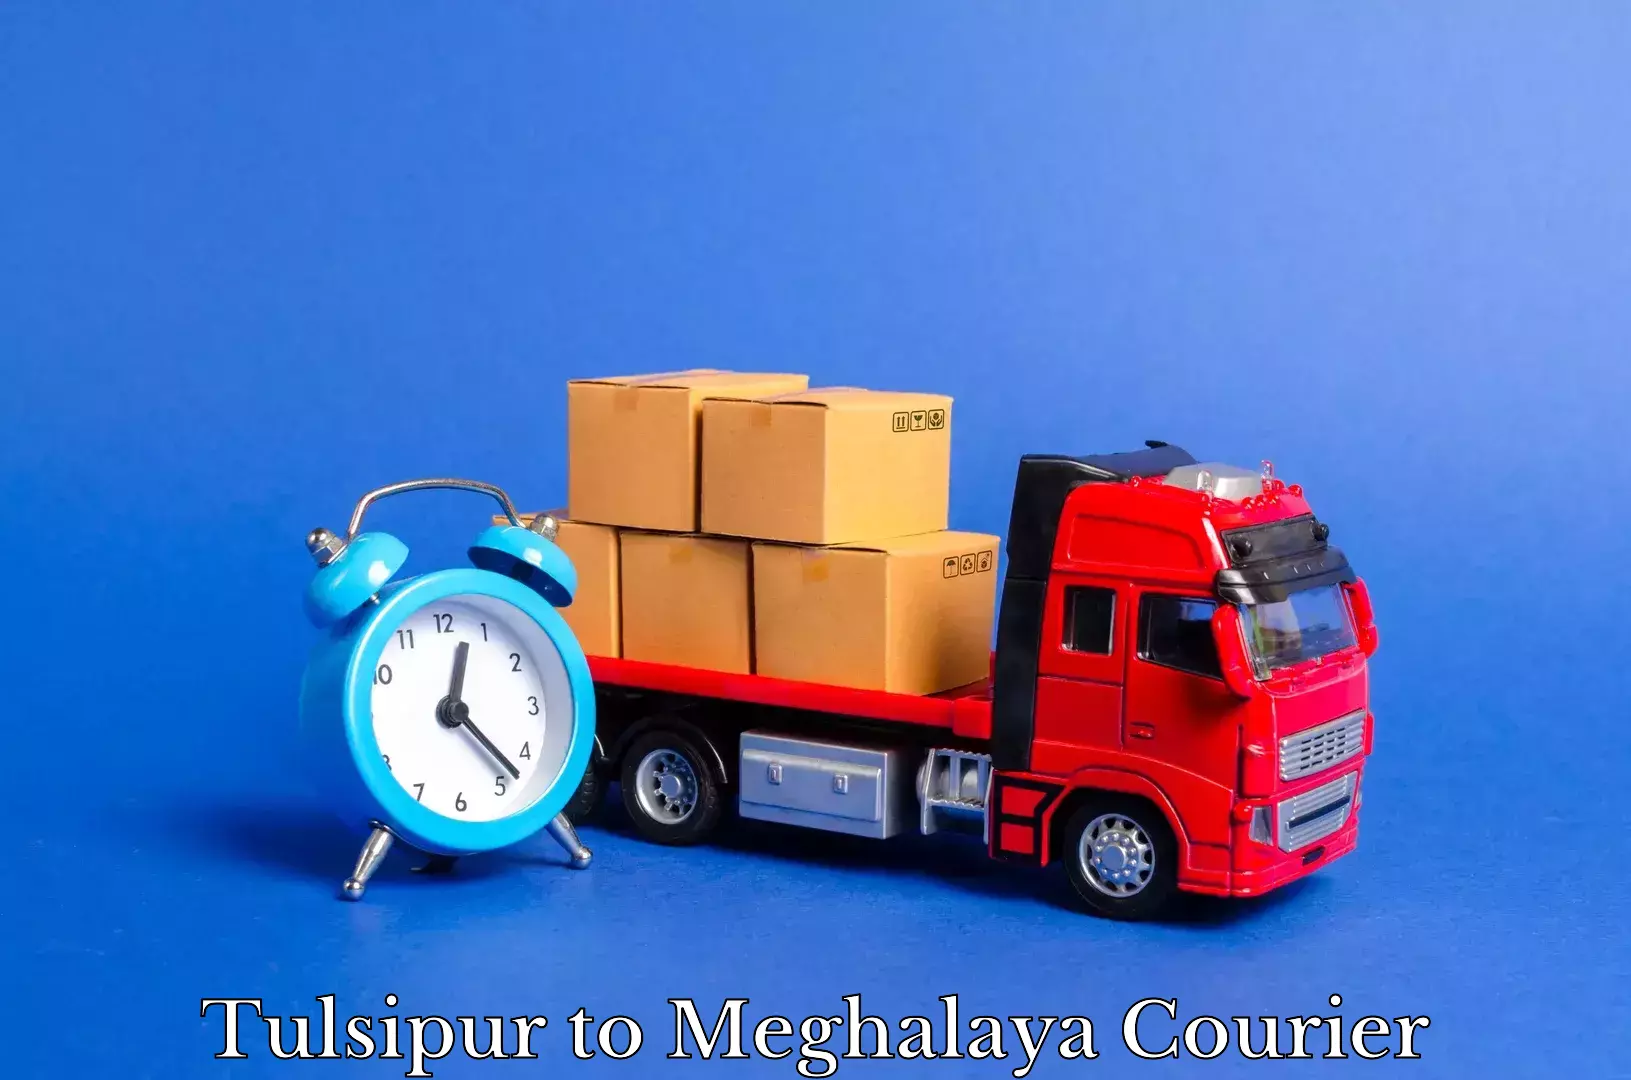 Furniture transport specialists Tulsipur to Meghalaya